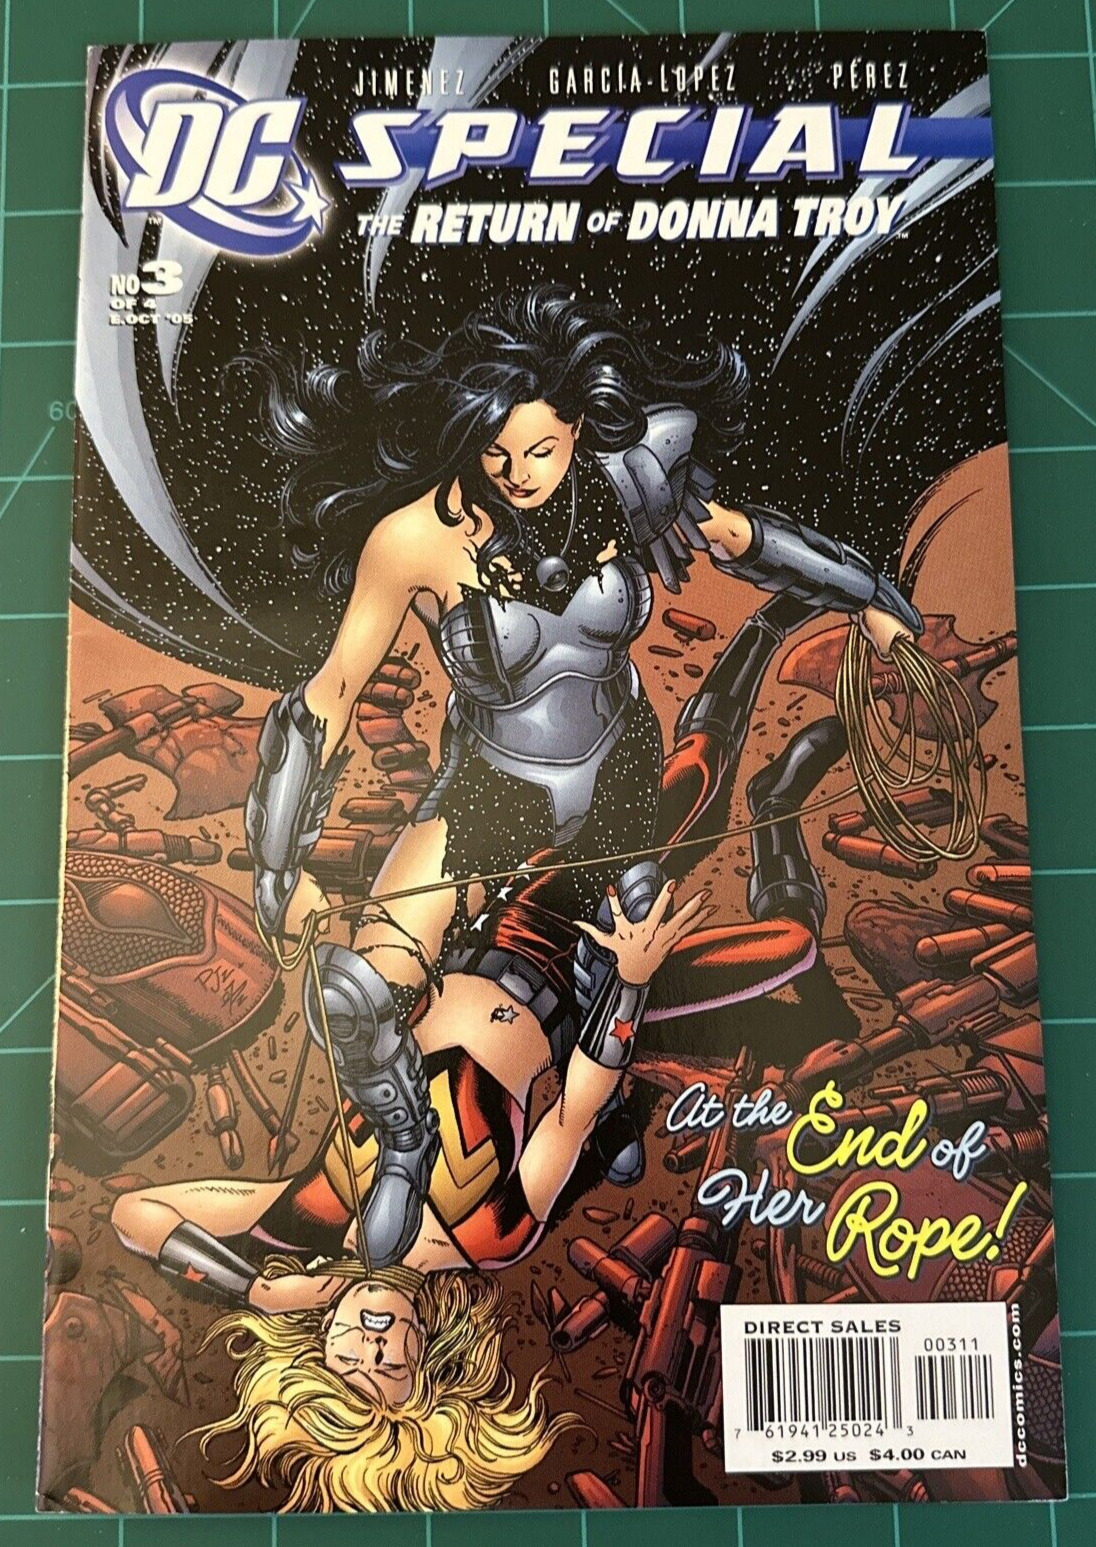 DC SPECIAL THE RETURN OF DONNA TROY #3  2005 GEORGE PEREZ